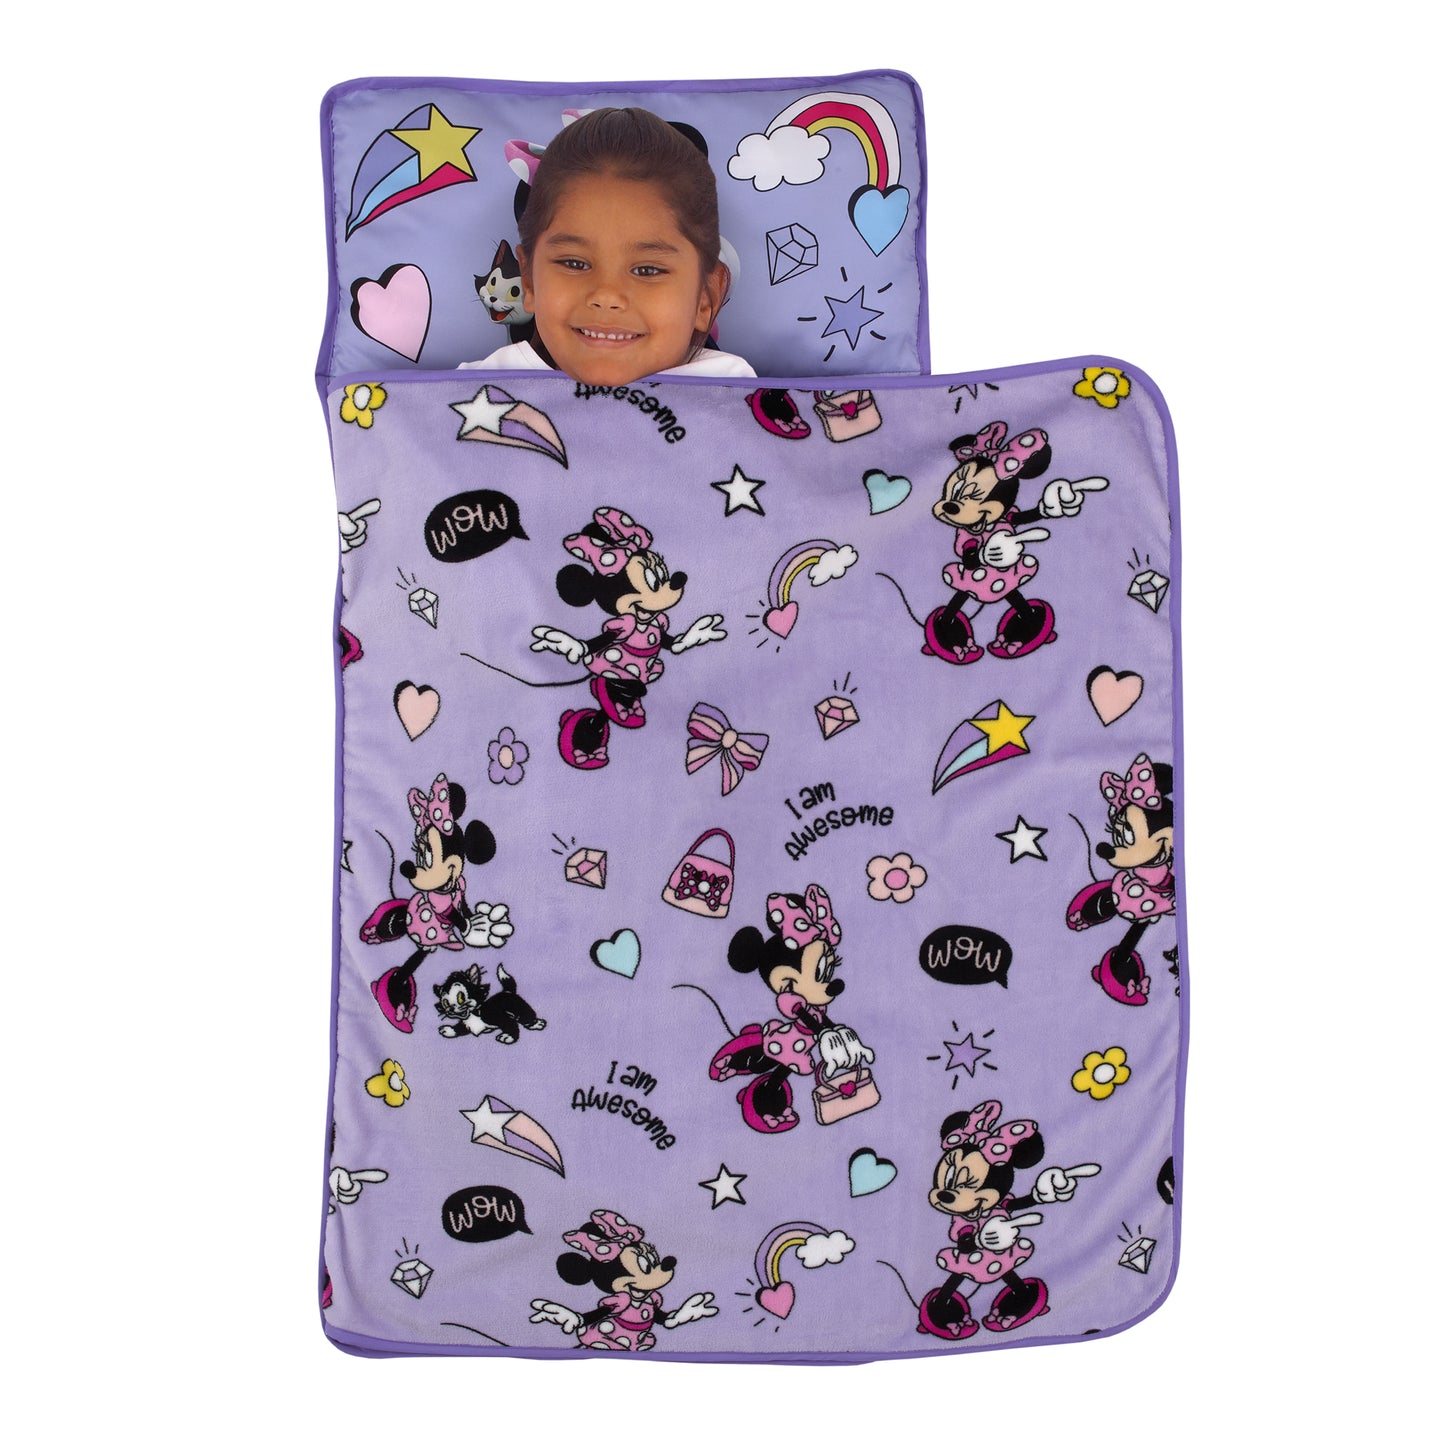 Disney Minnie Mouse I am Awesome Lavender and Pink Daisy Duck, Rainbow Hearts and Stars Toddler Nap Mat